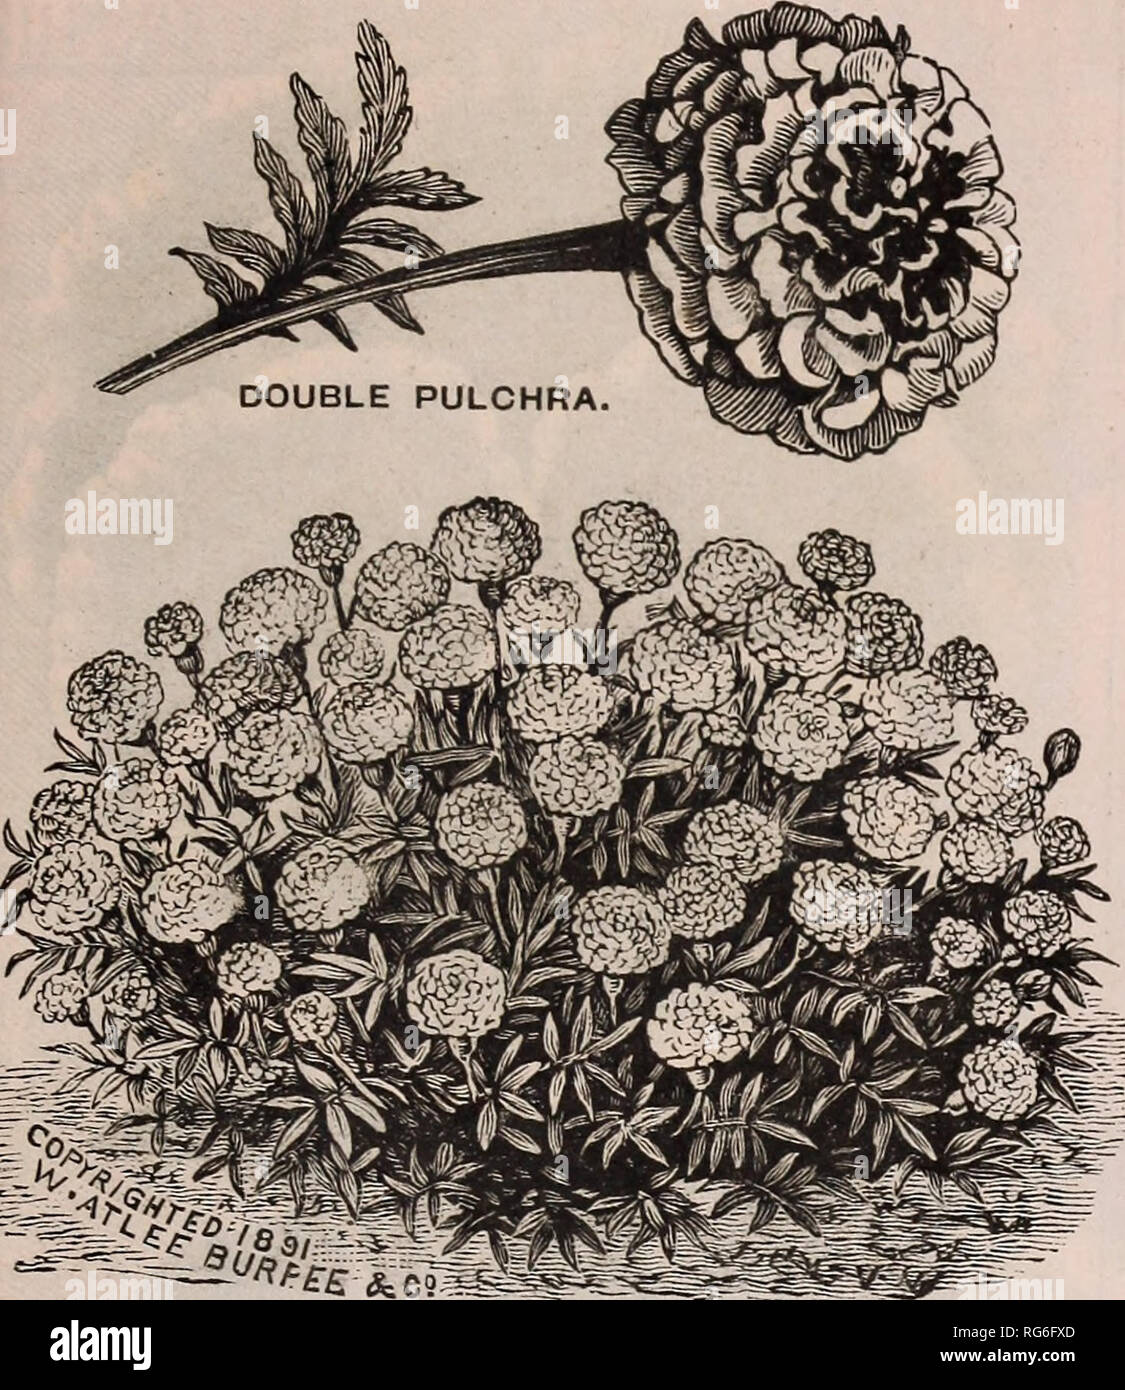 . Burpee's farm annual, 1892. Nursery stock Pennsylvania Philadelphia Catalogs; Flowers Catalogs; Vegetables Catalogs; Seeds Catalogs. BURPEE'S SPECIAL FLOWER SEEDS. Ill. A PLANT OF ORANGE BALL MARIGOLD. NEW MARIGOLD—BROWN MARBLE.-Some years ago we introduced the Dwarf Pulchra Mari- gold, which has become extremely popular on ac- count of its neat, compact habit of growth and beau- tiful flowers. This variety which we now offer is equally as handsome but altogether distinct. The little plants when only six inches high are full of flowers, while the bushes are always very dwarf and compact, gro Stock Photo